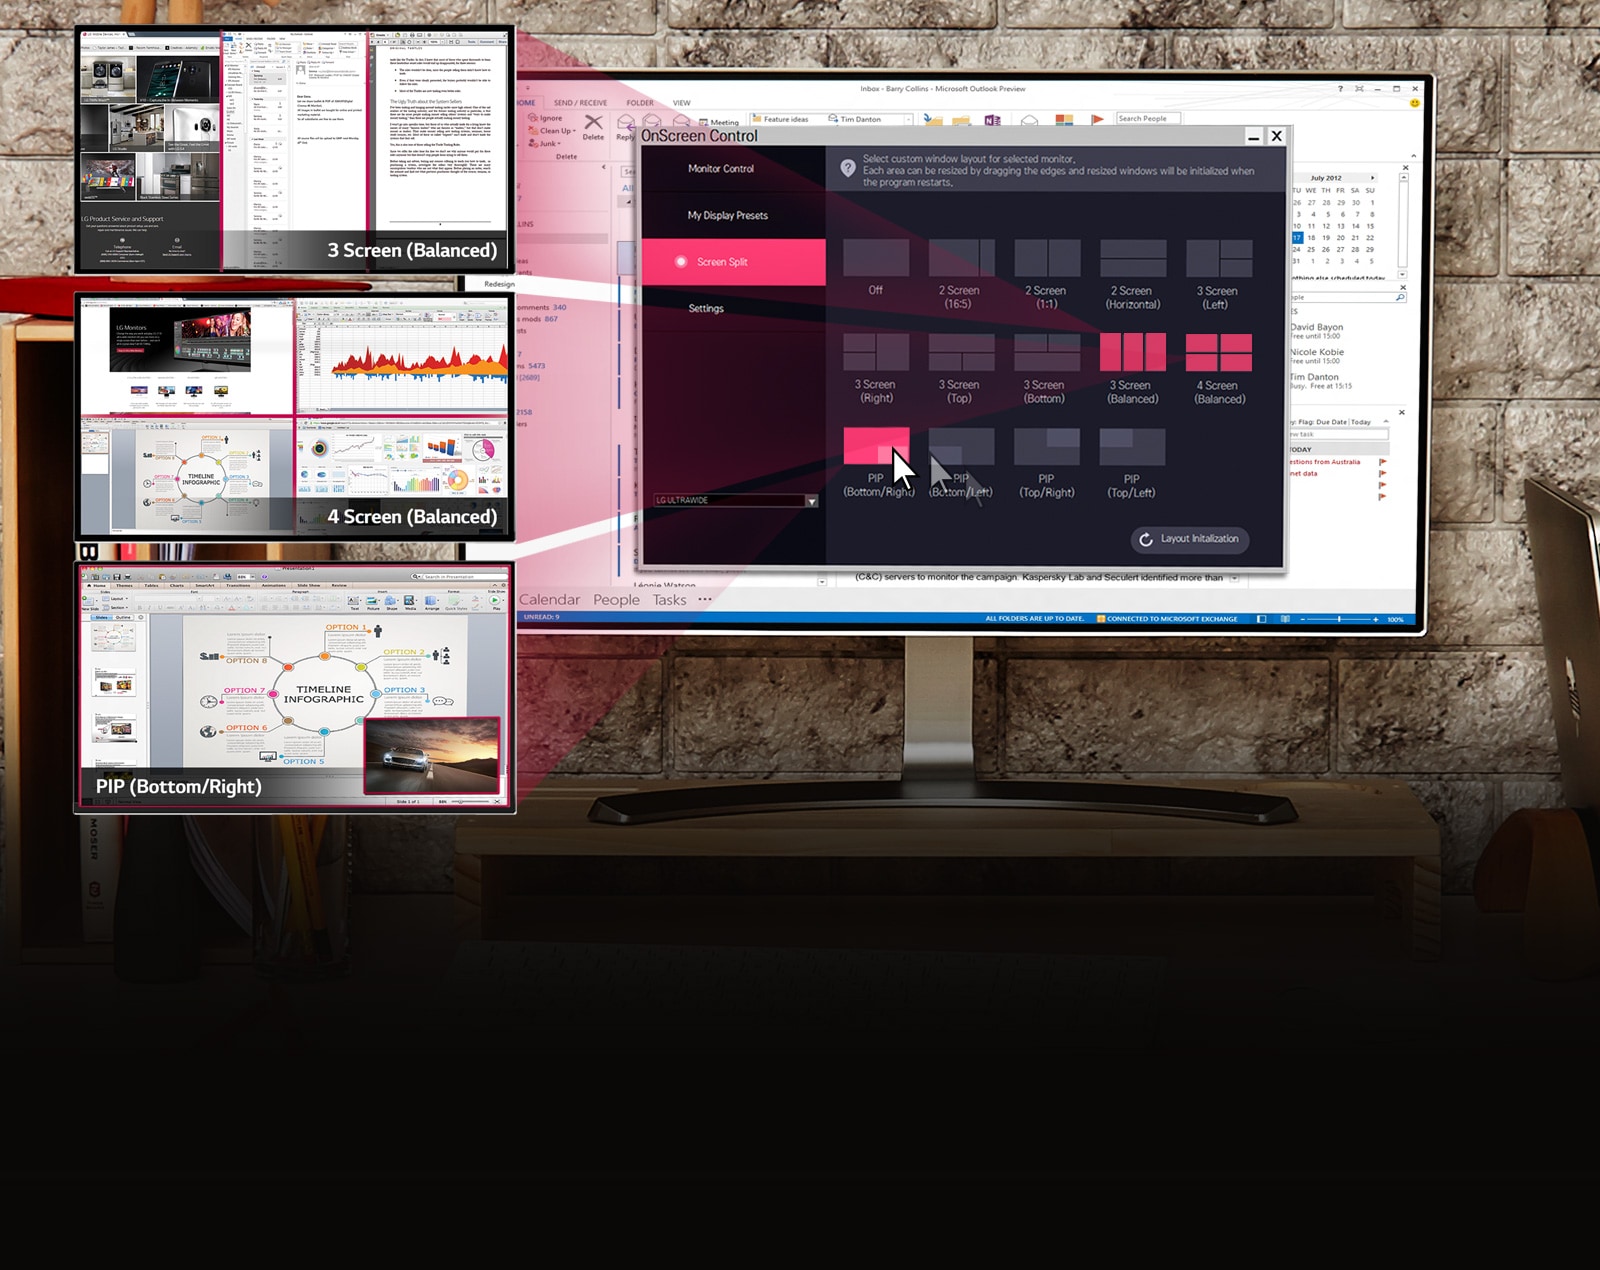 Customize Your Workspace for Multitasking